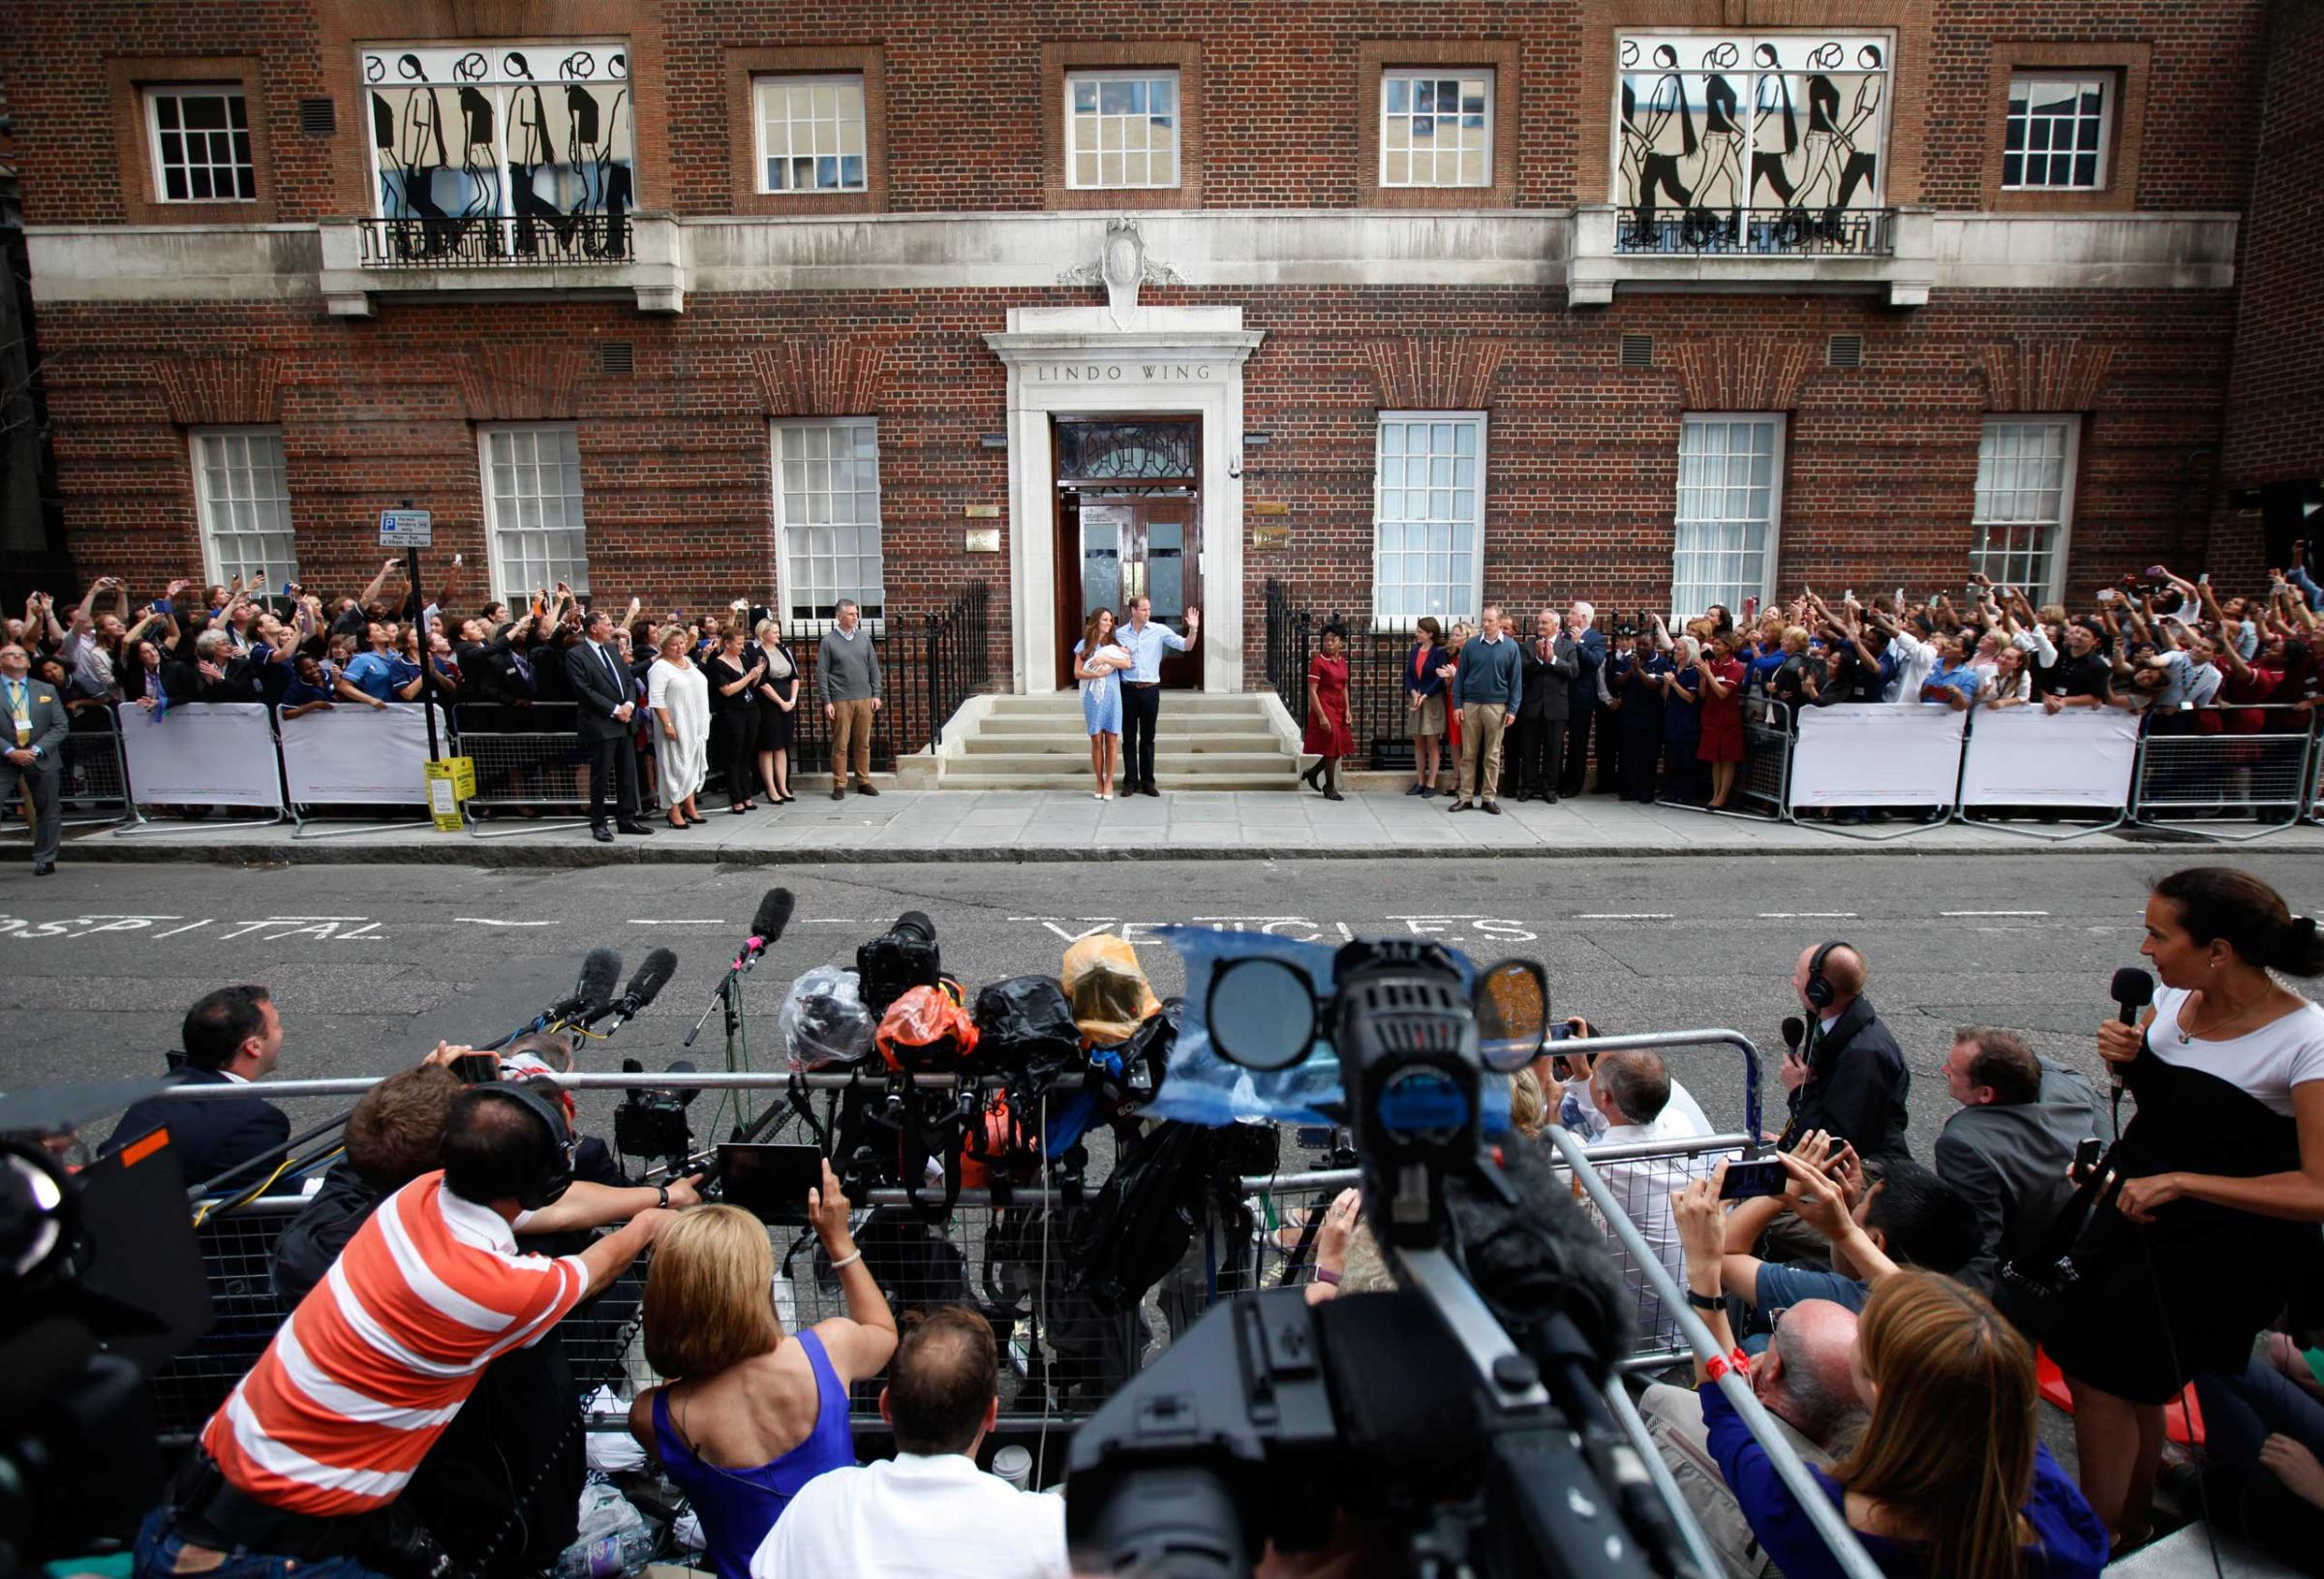 Britain's Prince William and his wife Catherine, Duchess of Cambridge appear with their baby son, outside the Lindo Wing of St Mary's Hospital, in central London July 23, 2013. Kate gave birth to the couple's first child, who is third in line to the British throne, on Monday afternoon, ending weeks of feverish anticipation about the arrival of the royal baby. REUTERS/Suzanne Plunkett (BRITAIN - Tags: ROYALS ENTERTAINMENT HEALTH) - RTX11WH3